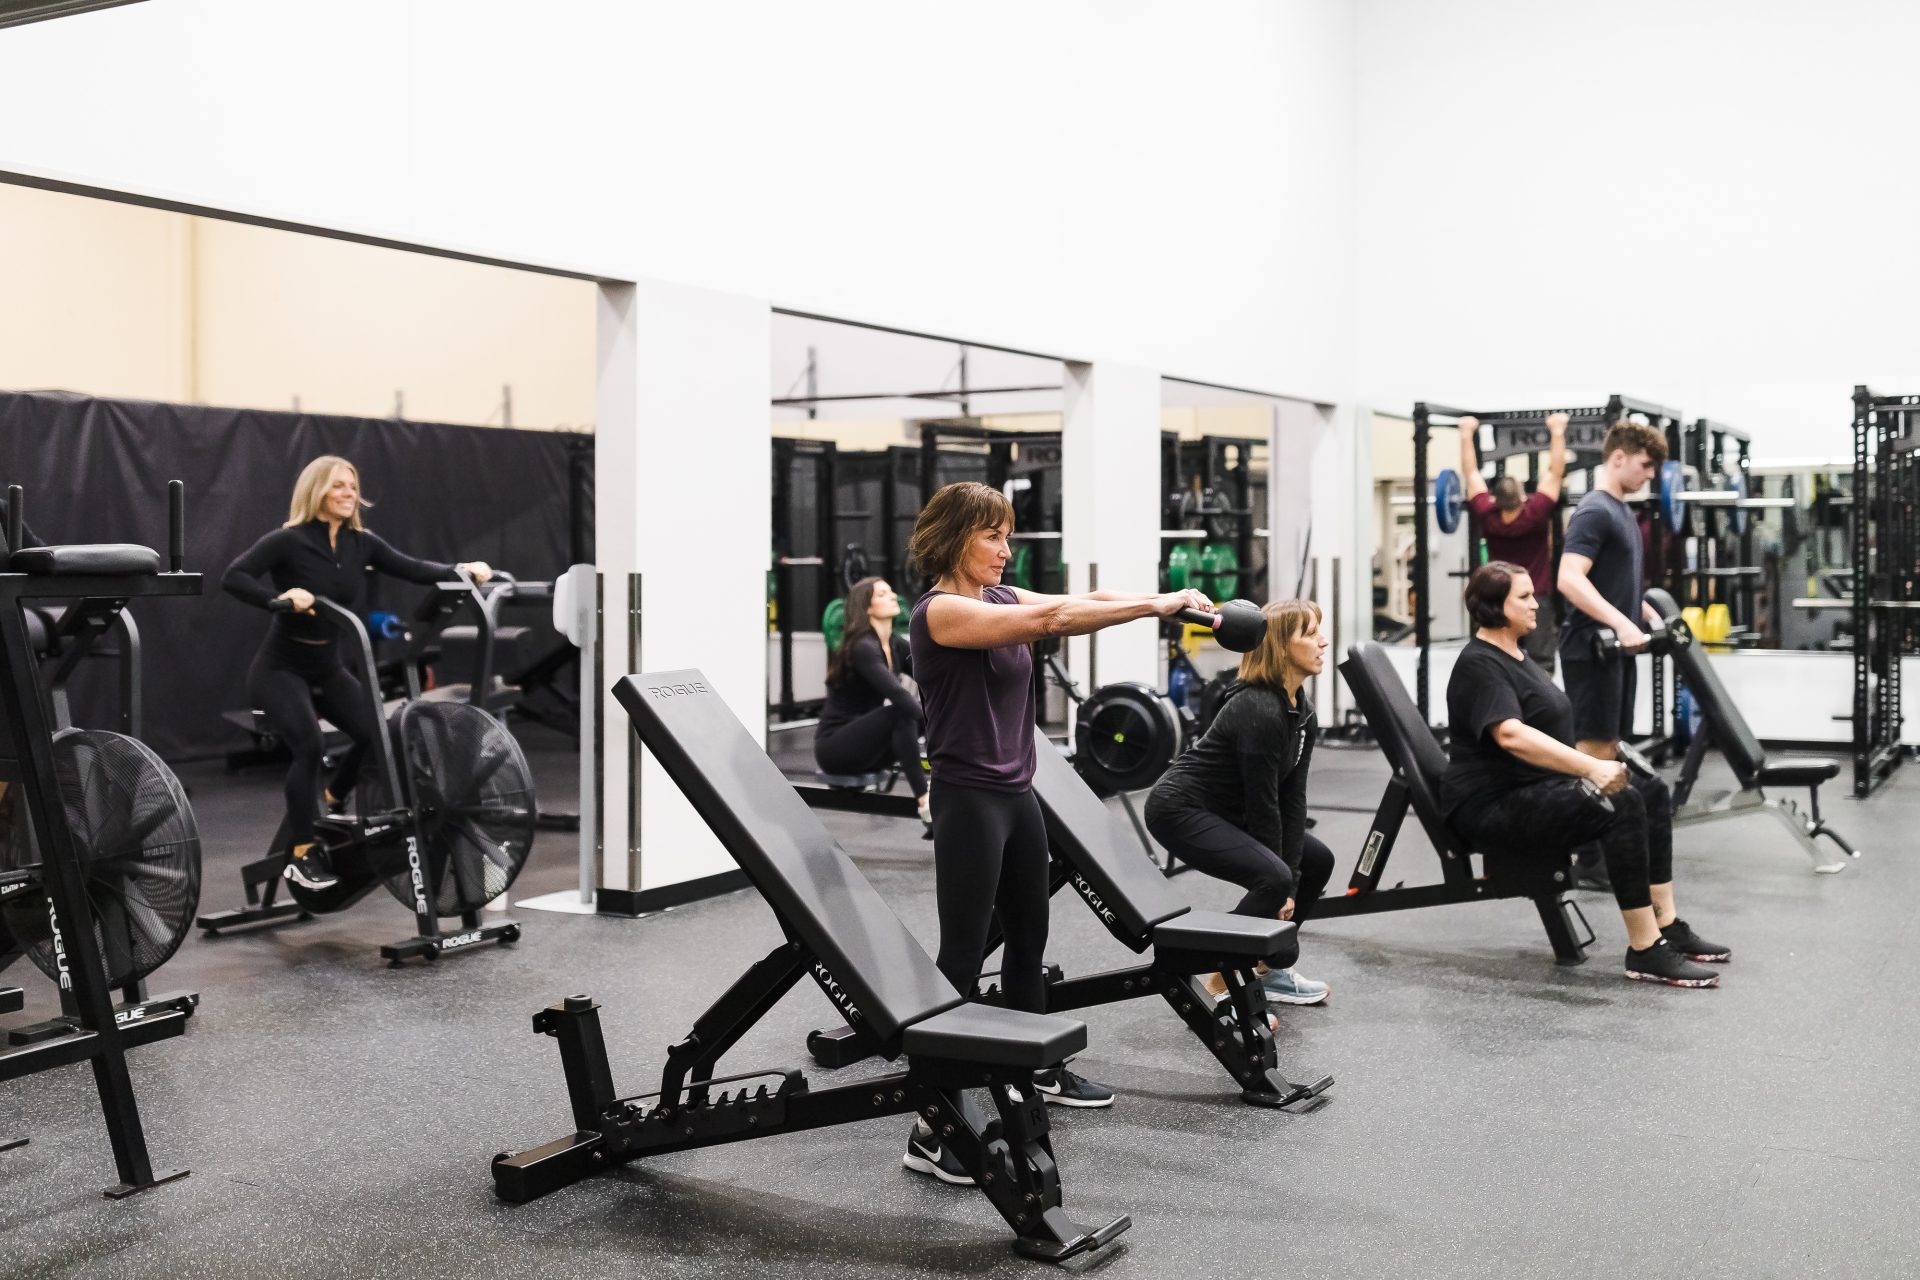 A group of members and personal trainers using the Free Weight Room at Airport Health Club